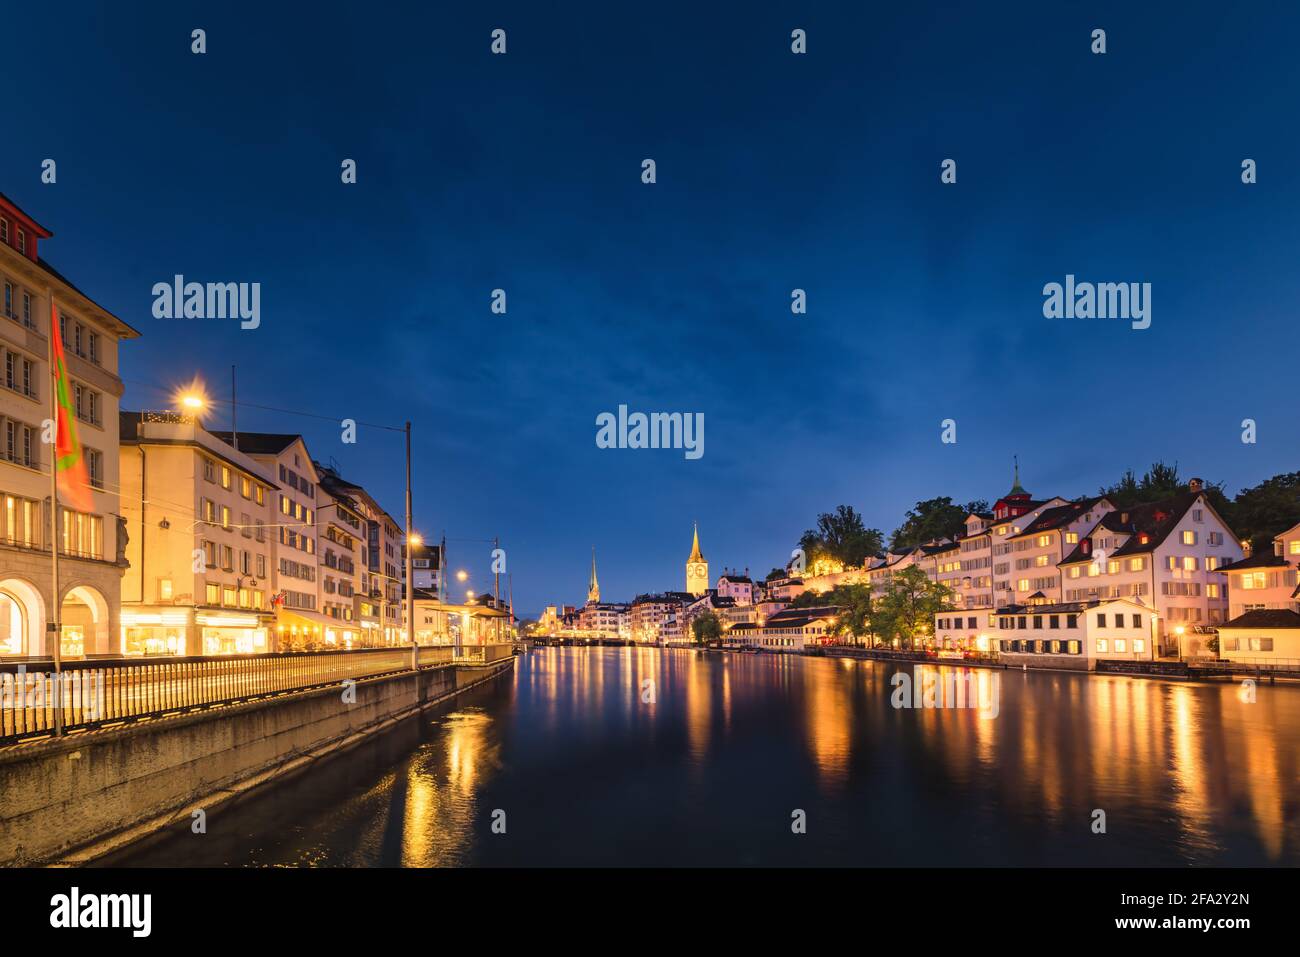 Cityscape of Zurich City and Illuminated Lights at Nightlife, Landscape Historic Old Town of Zurich, Switzerland. Panoramic View Medieval Architecture Stock Photo